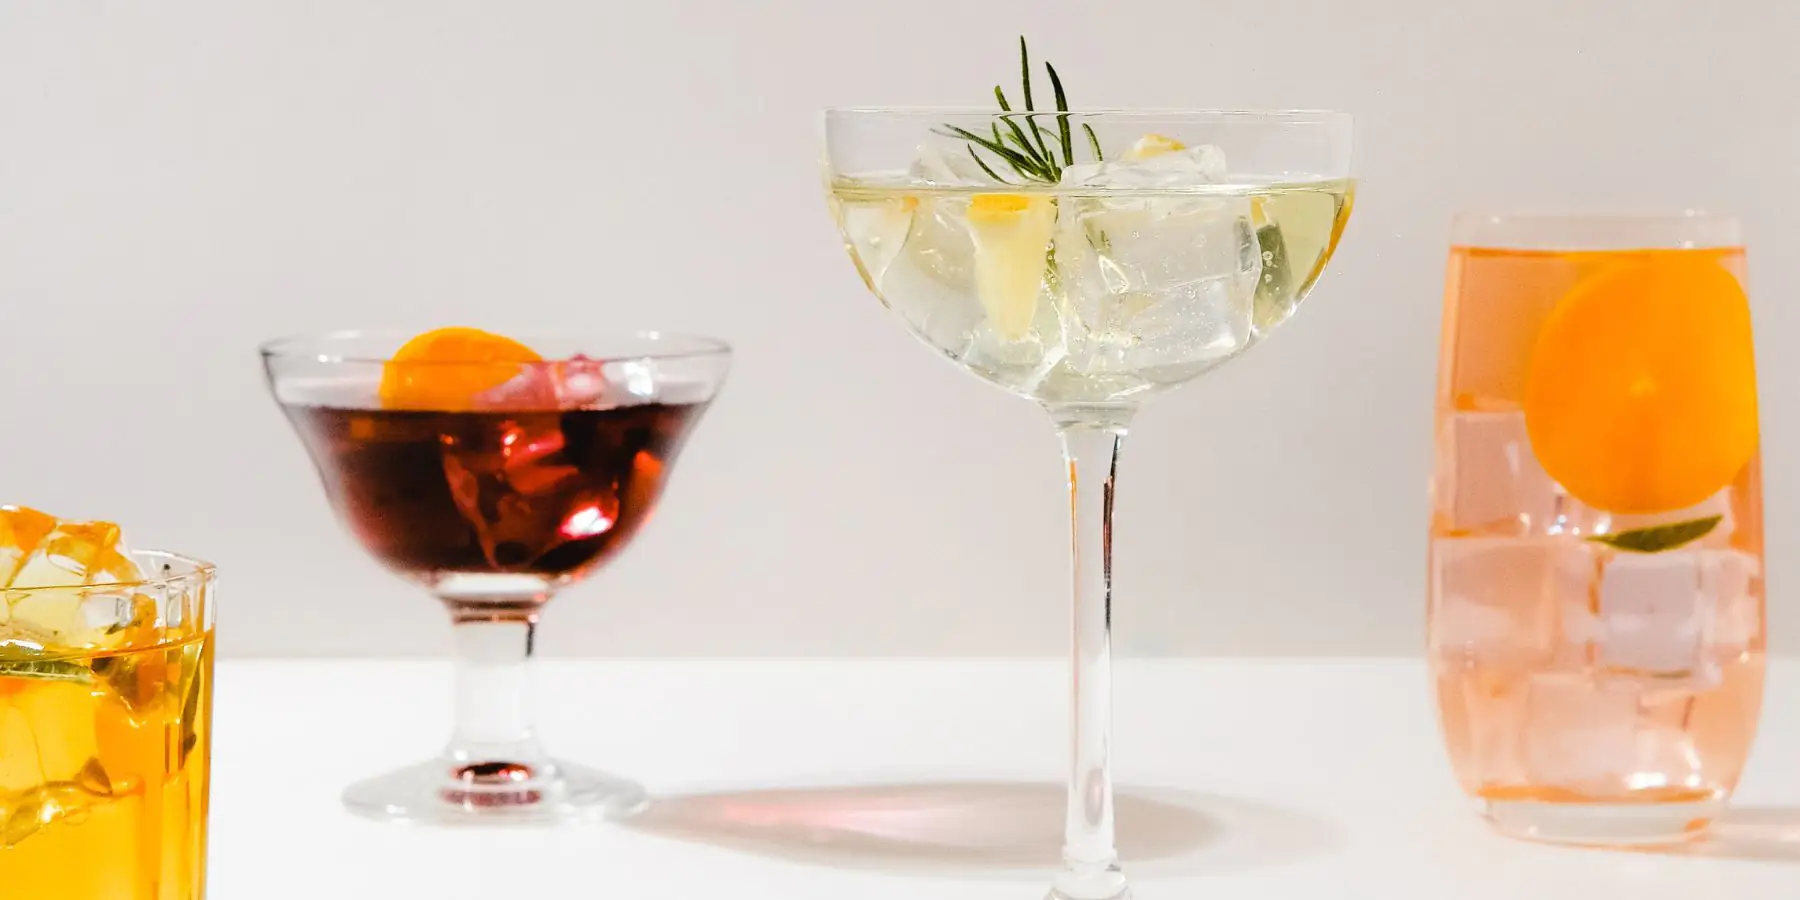 https://www.themixer.com/en-us/wp-content/uploads/sites/2/2022/07/237.US_Cocktail-Glass-Types_Canva_MAEknl6zO4Y-assorted-cocktail-drinks-in-glasses.jpg